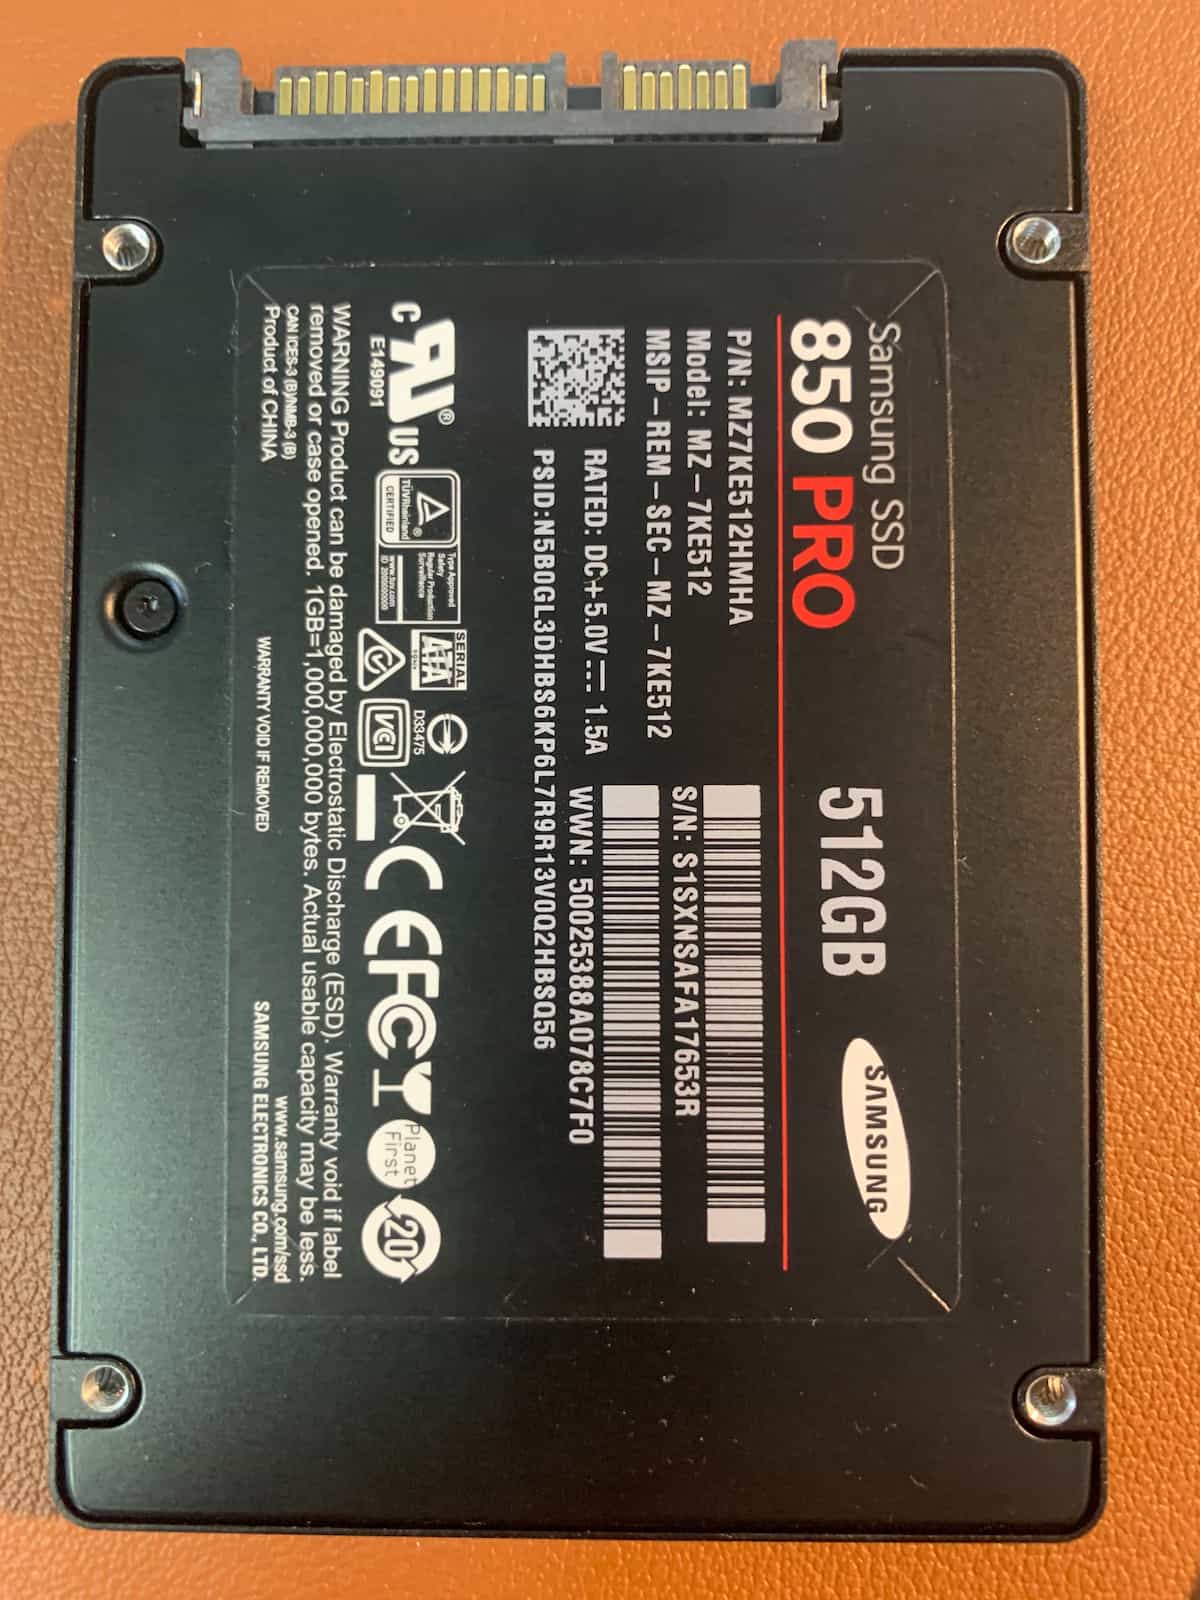 Samsung 850 PRO not being recognized by computer